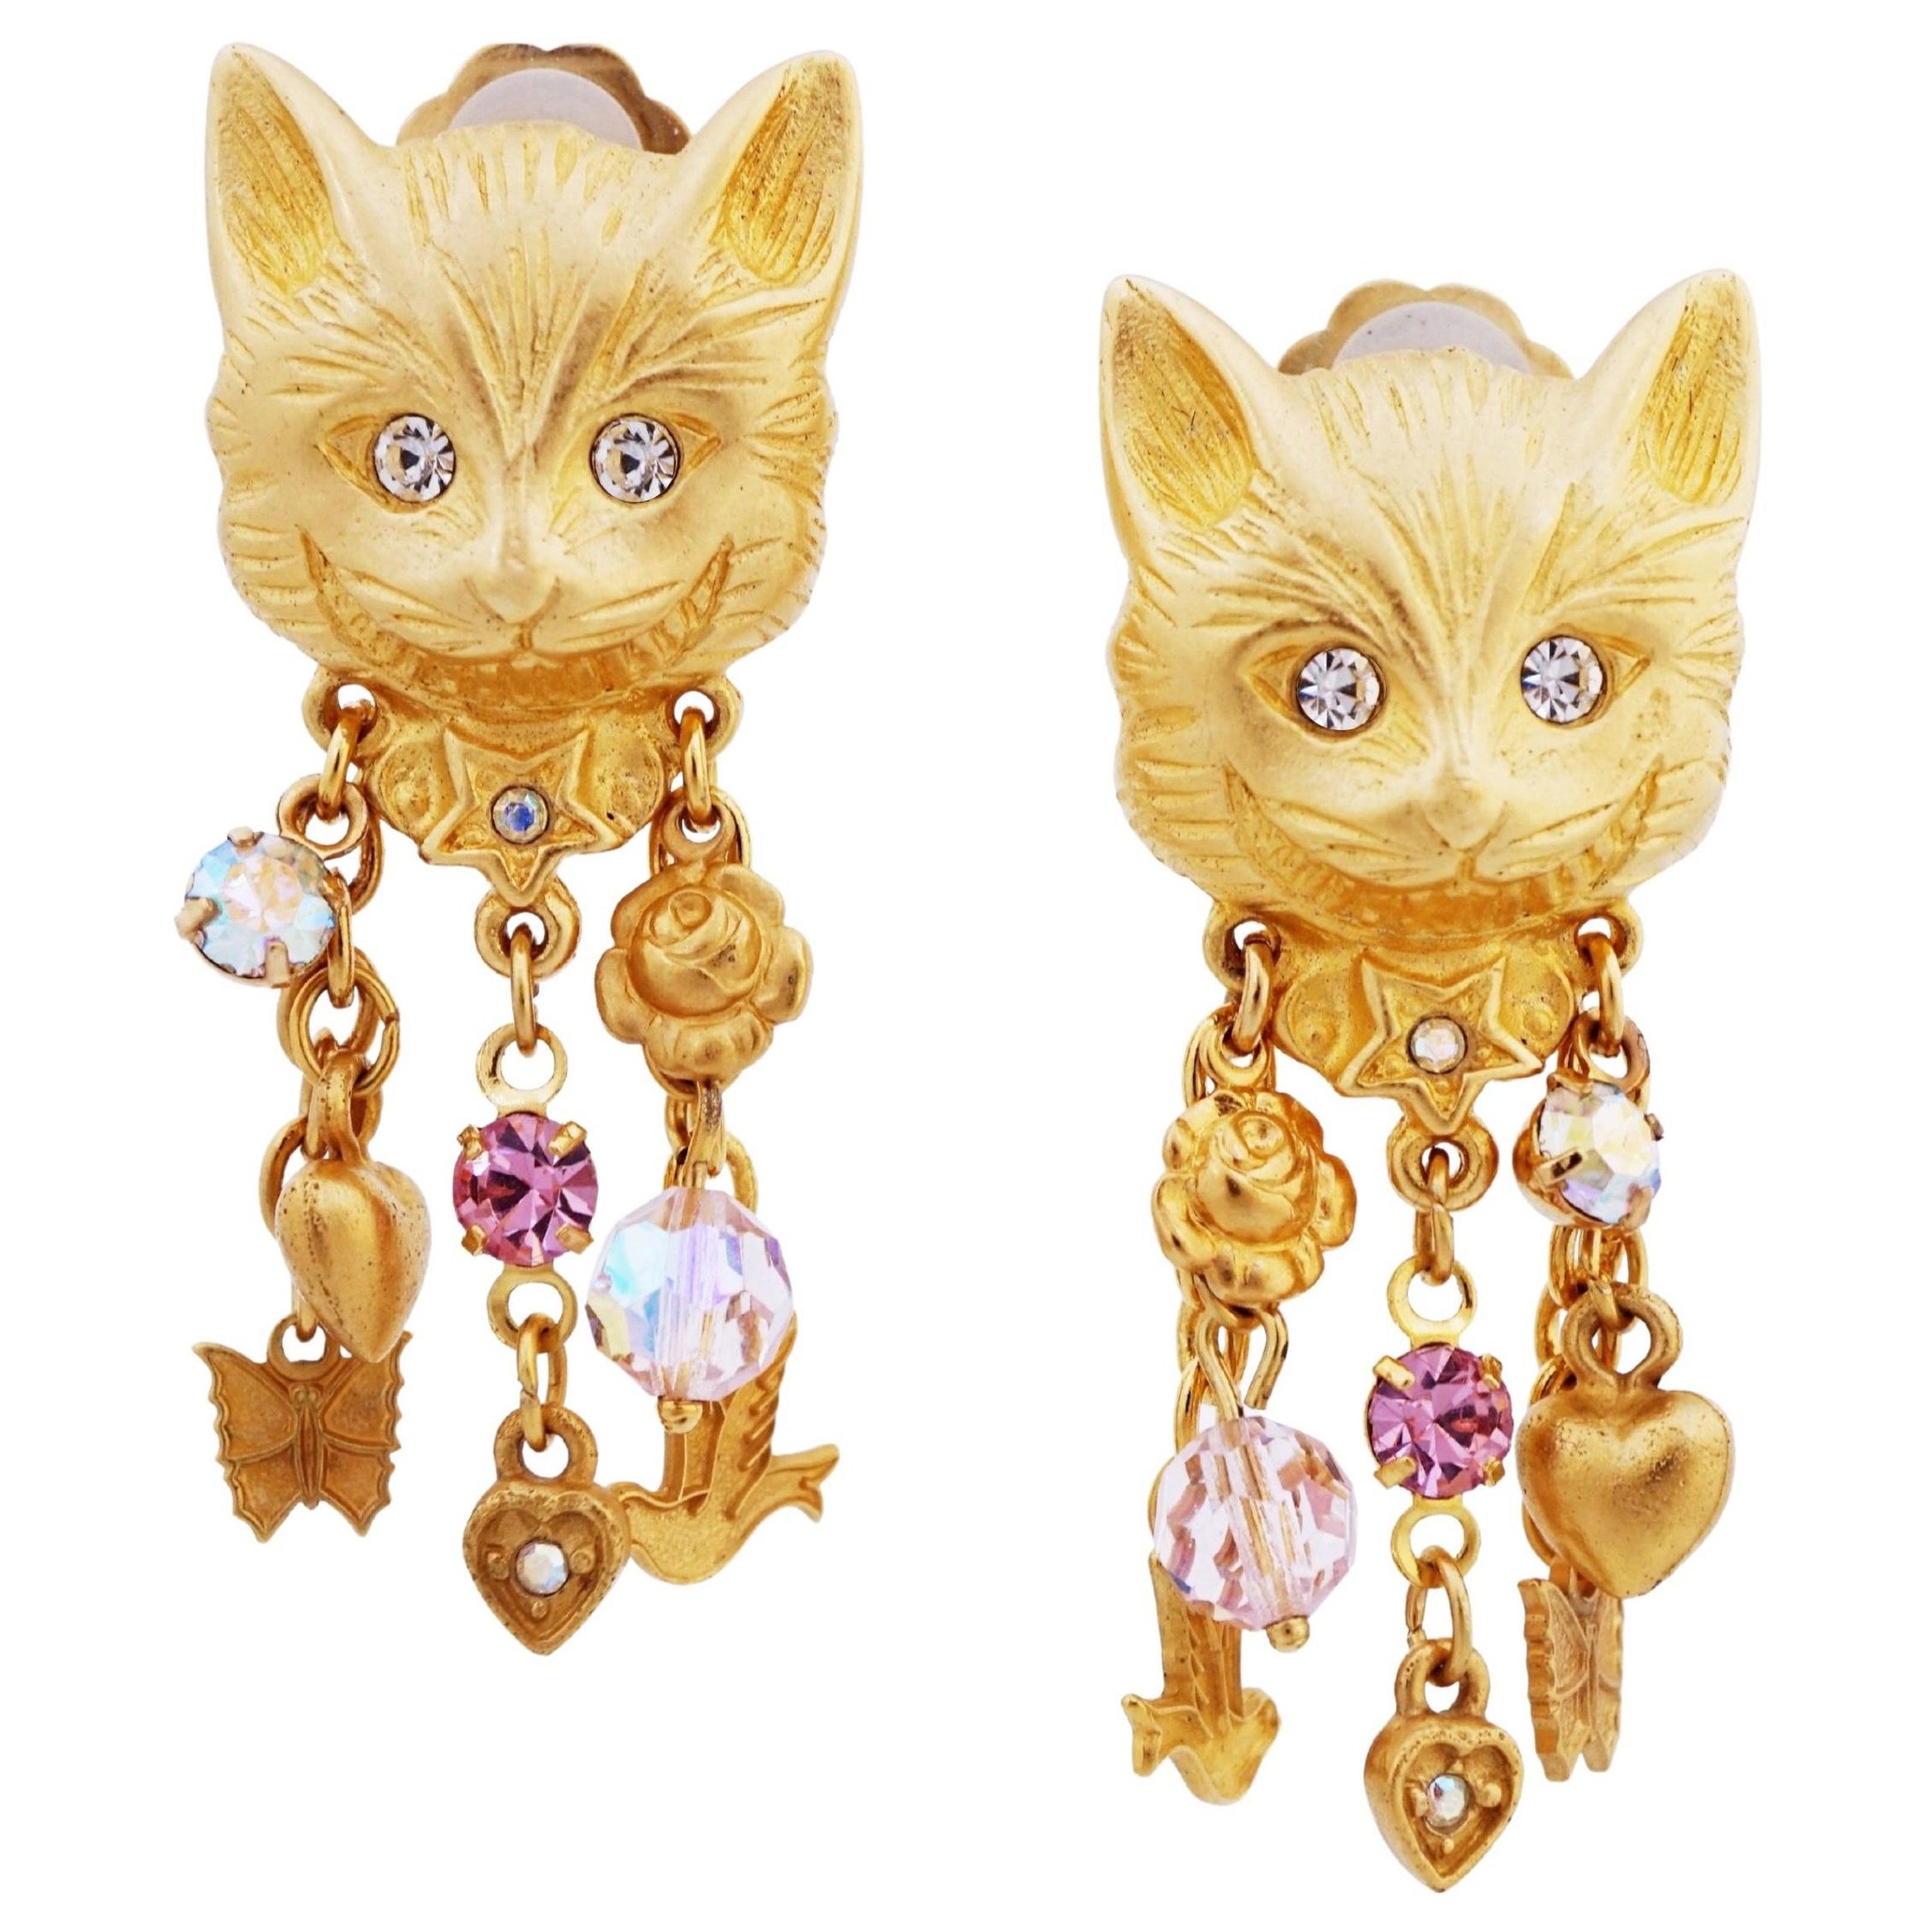 Gilded Cheshire Cat Figural Earrings With Charm Dangles By Kirks Folly, 1980s For Sale